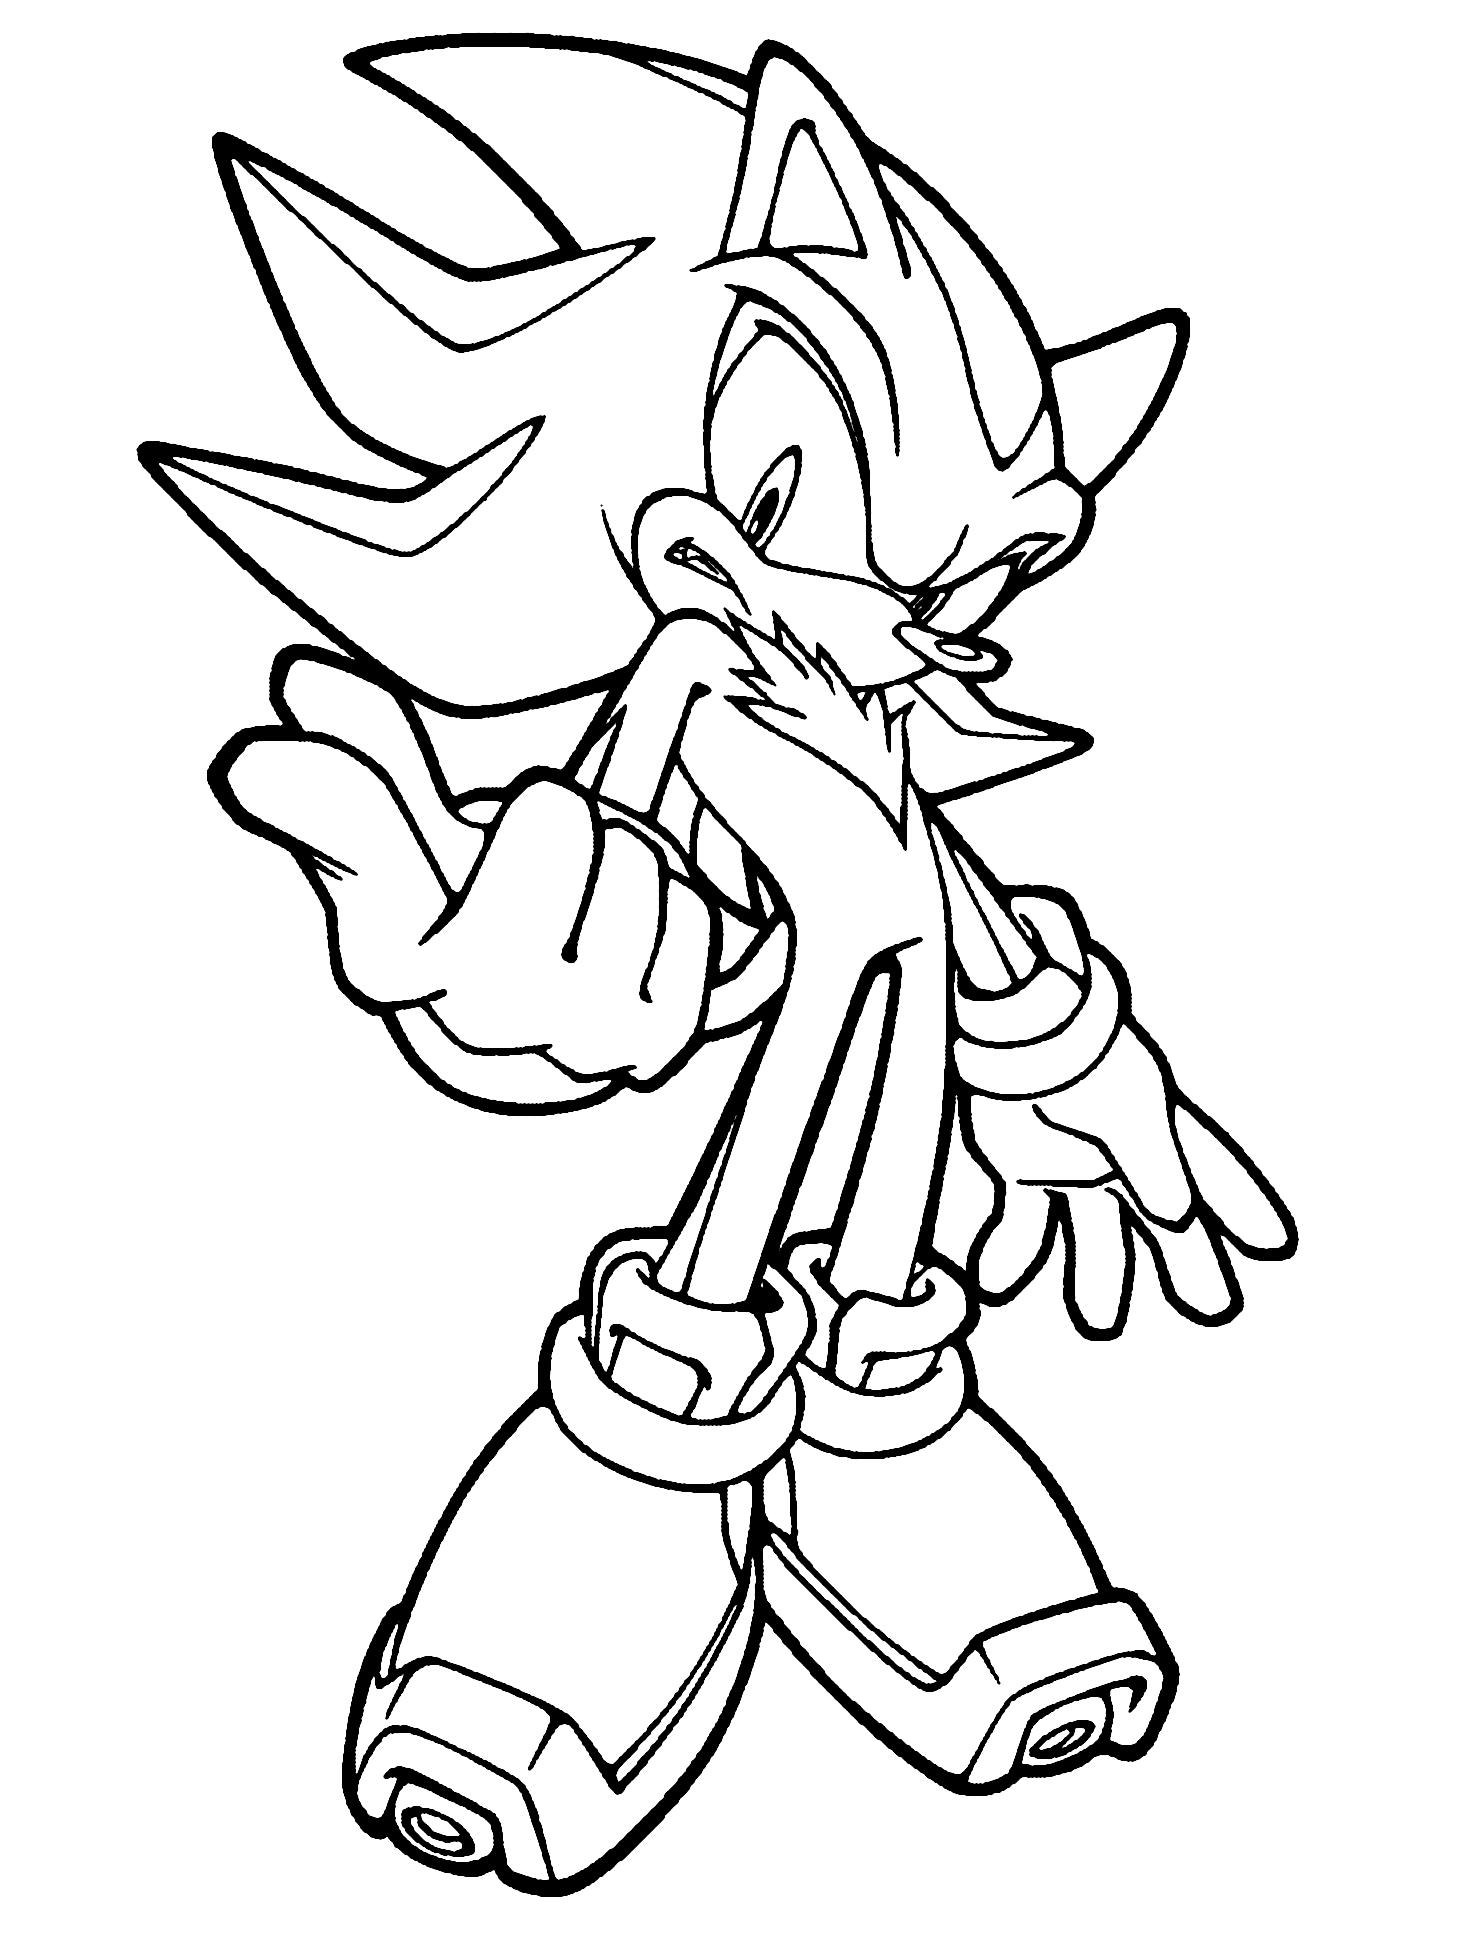 Super Sonic Online Coloring Pages - Coloring Home